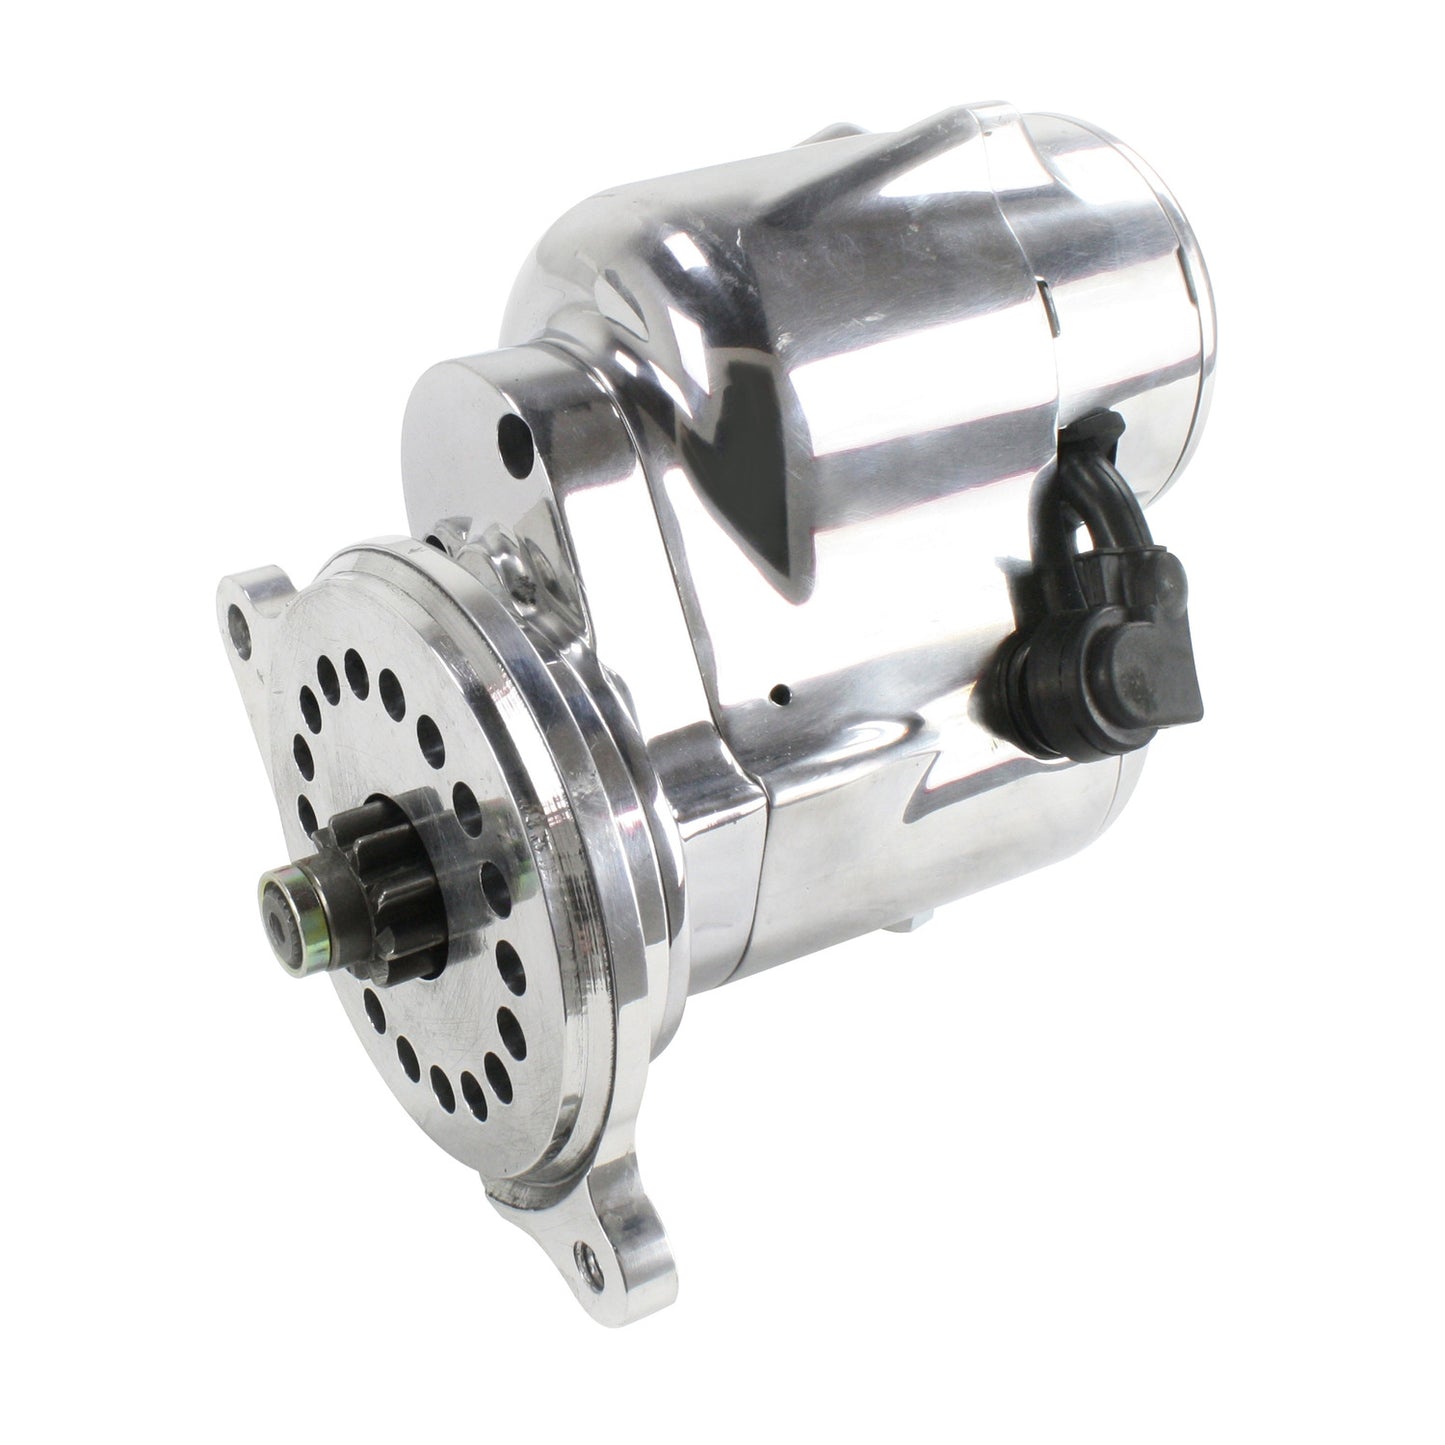 Pertronix part number S3004P Contour Starter Ford 1963-2001 221-302/5.0L, 351W and 351C with automatic and 5 speed manual trans (157T or 164T flywheel), 3/4" offset polished